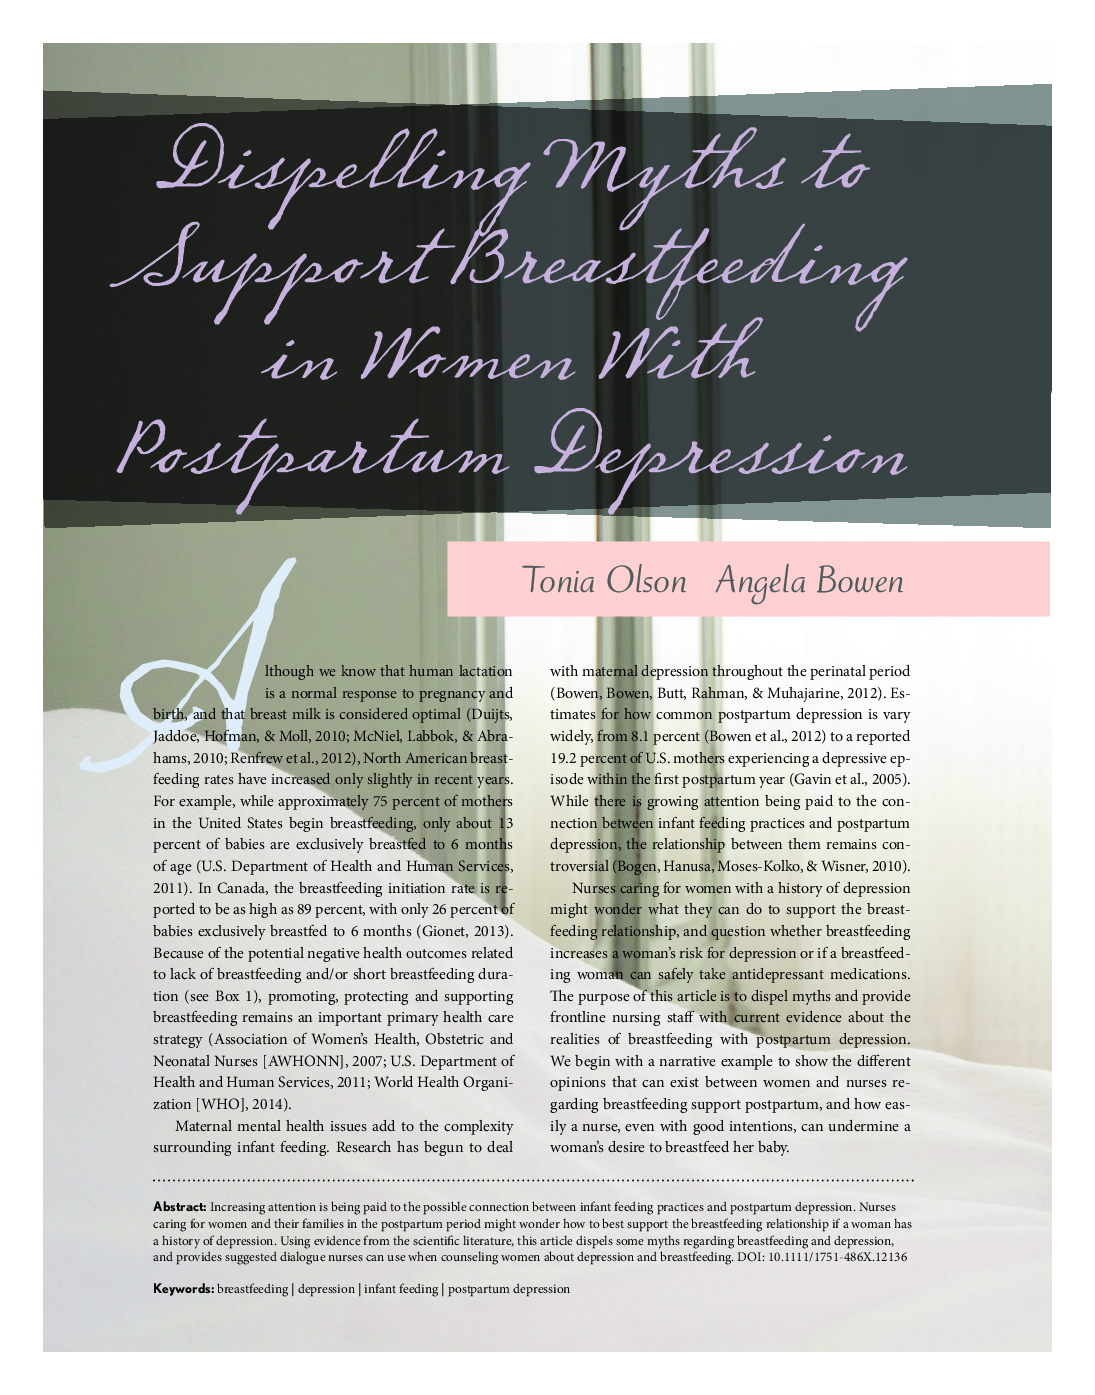 Dispelling Myths to Support Breastfeeding in Women With Postpartum Depression